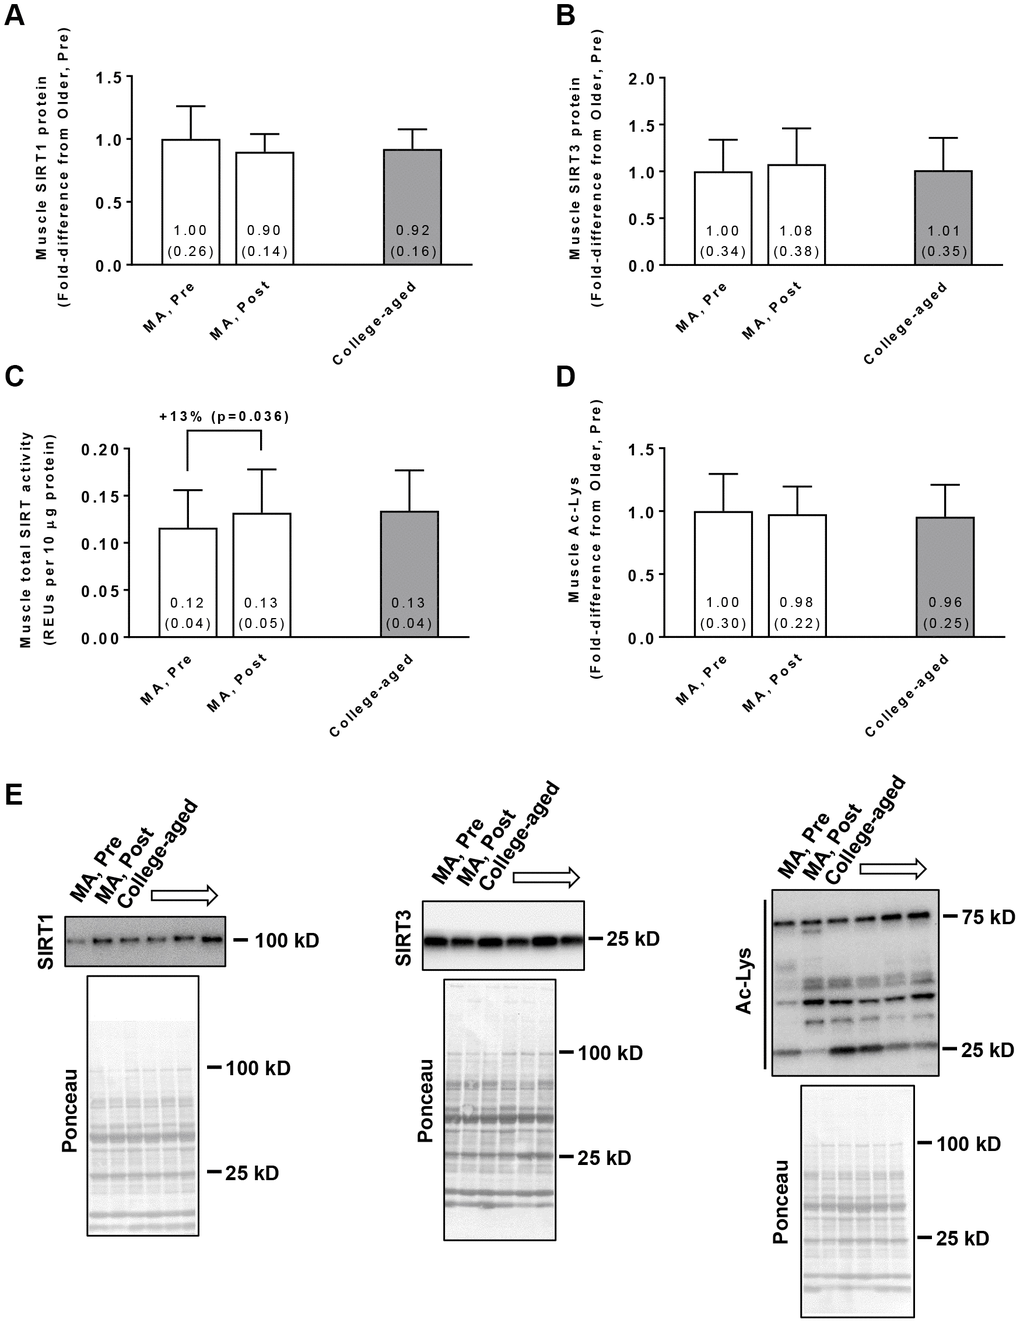 Vastus lateralis muscle tissue SIRT1 protein levels (A), SIRT3 protein levels (B), global sirtuin (SIRT) activity (C), and acetylated protein levels (D) in middle-aged (MA) participants prior to (Pre) and following 10 weeks of resistance training (Post) as well as basal values in college-aged participants that were recreationally trained. All data are presented as means±SD values. Panel (E) shows representative Western blots for n=2 middle-aged participants (pre and Post) as well as n=2 college-aged participants. All middle-aged participants were assayed; however, 14/15 college-aged participants were assayed due to tissue limitations.